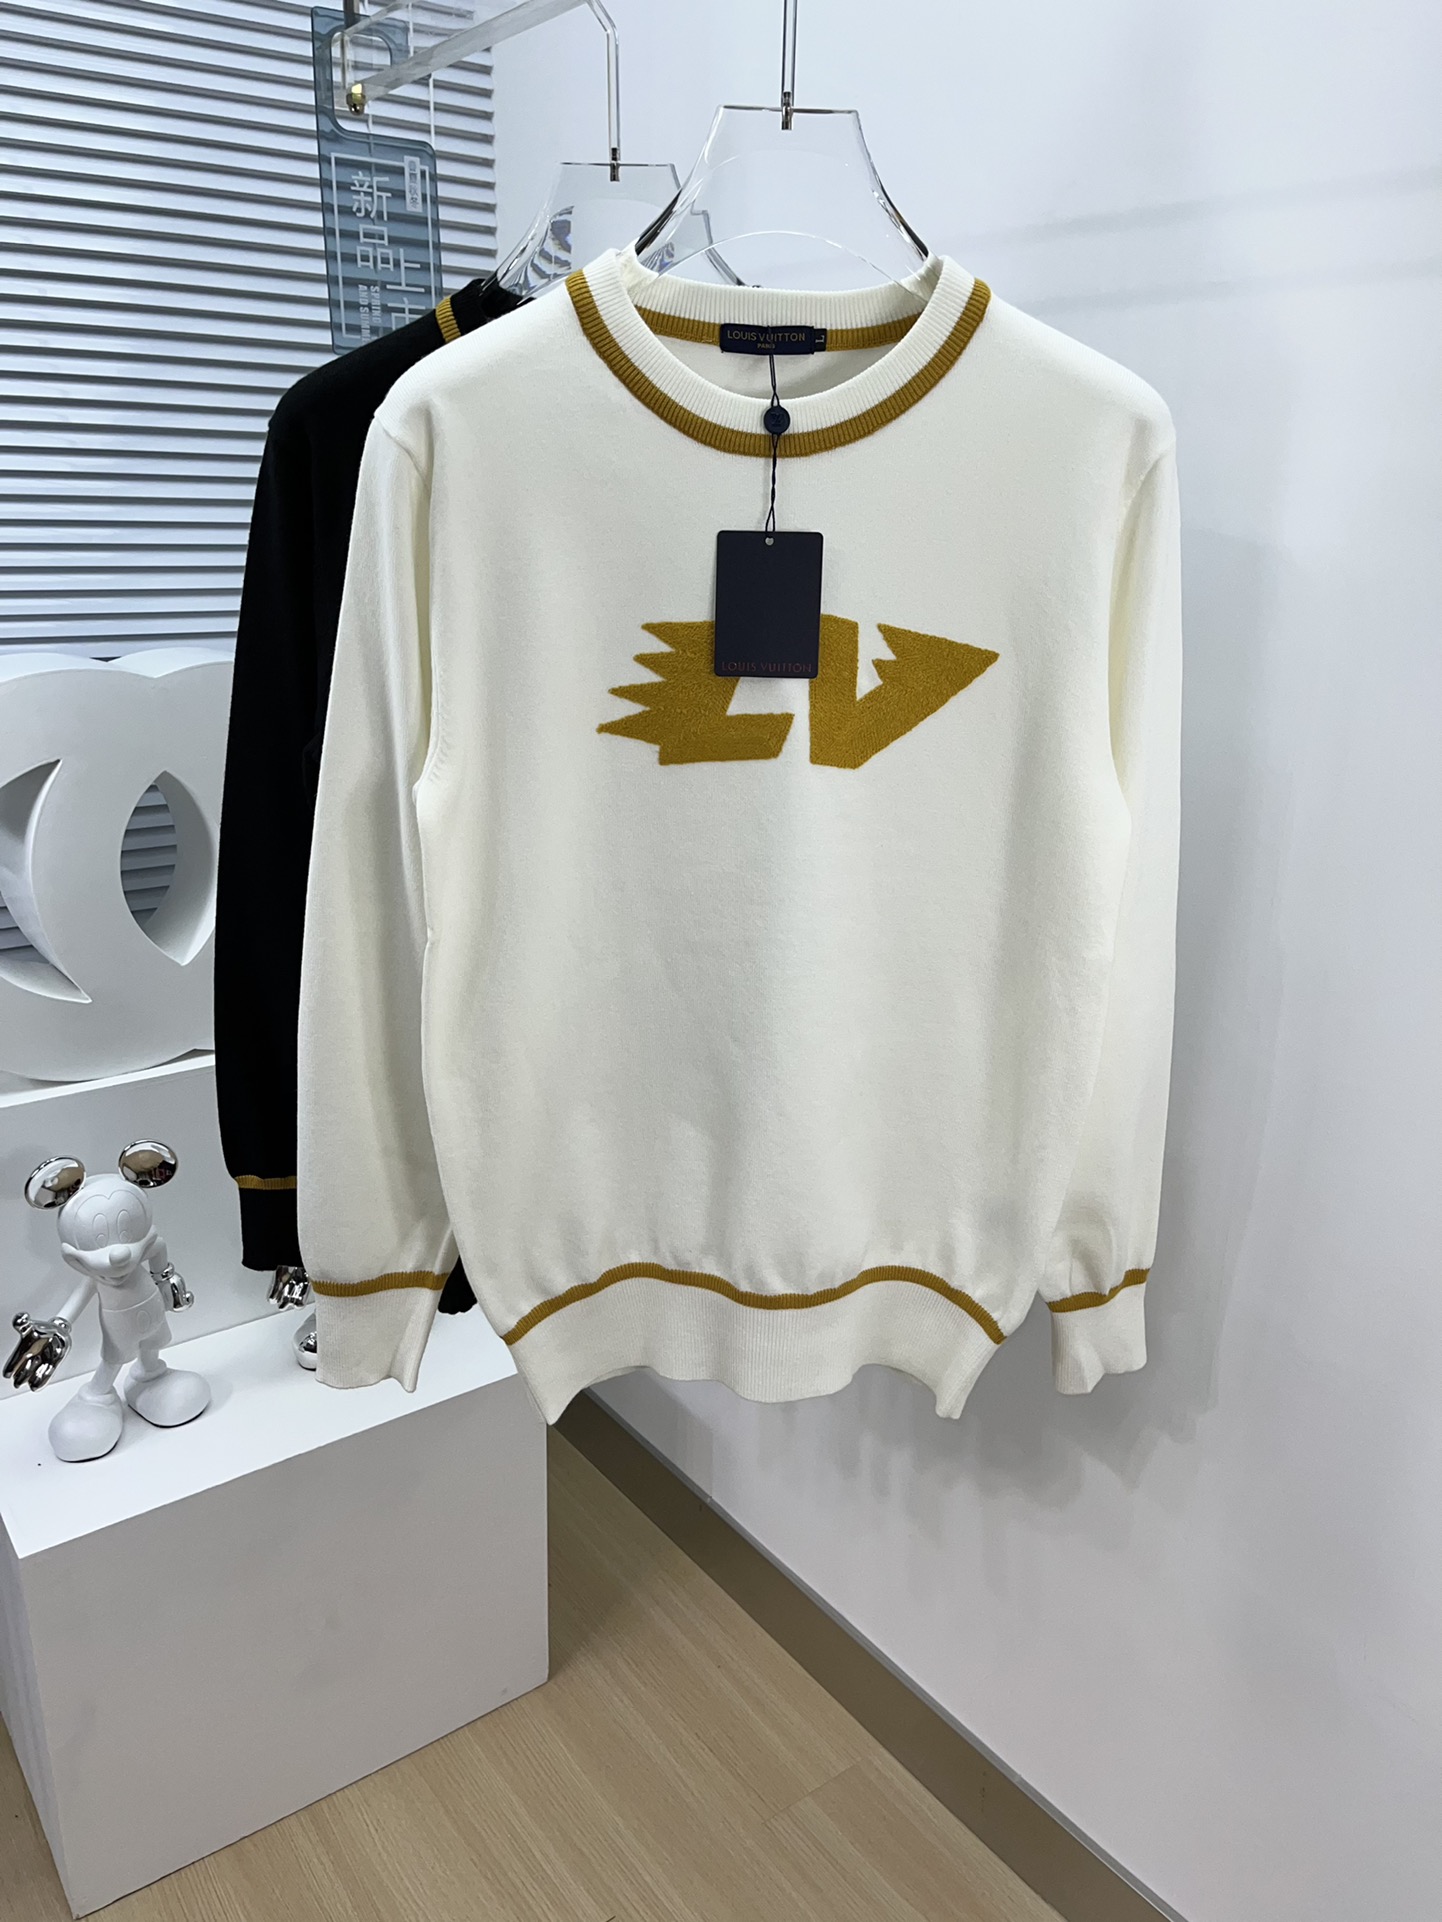 Louis Vuitton Clothing Sweatshirts Fake Cheap best online
 Embroidery Men Wool Fall Collection Fashion